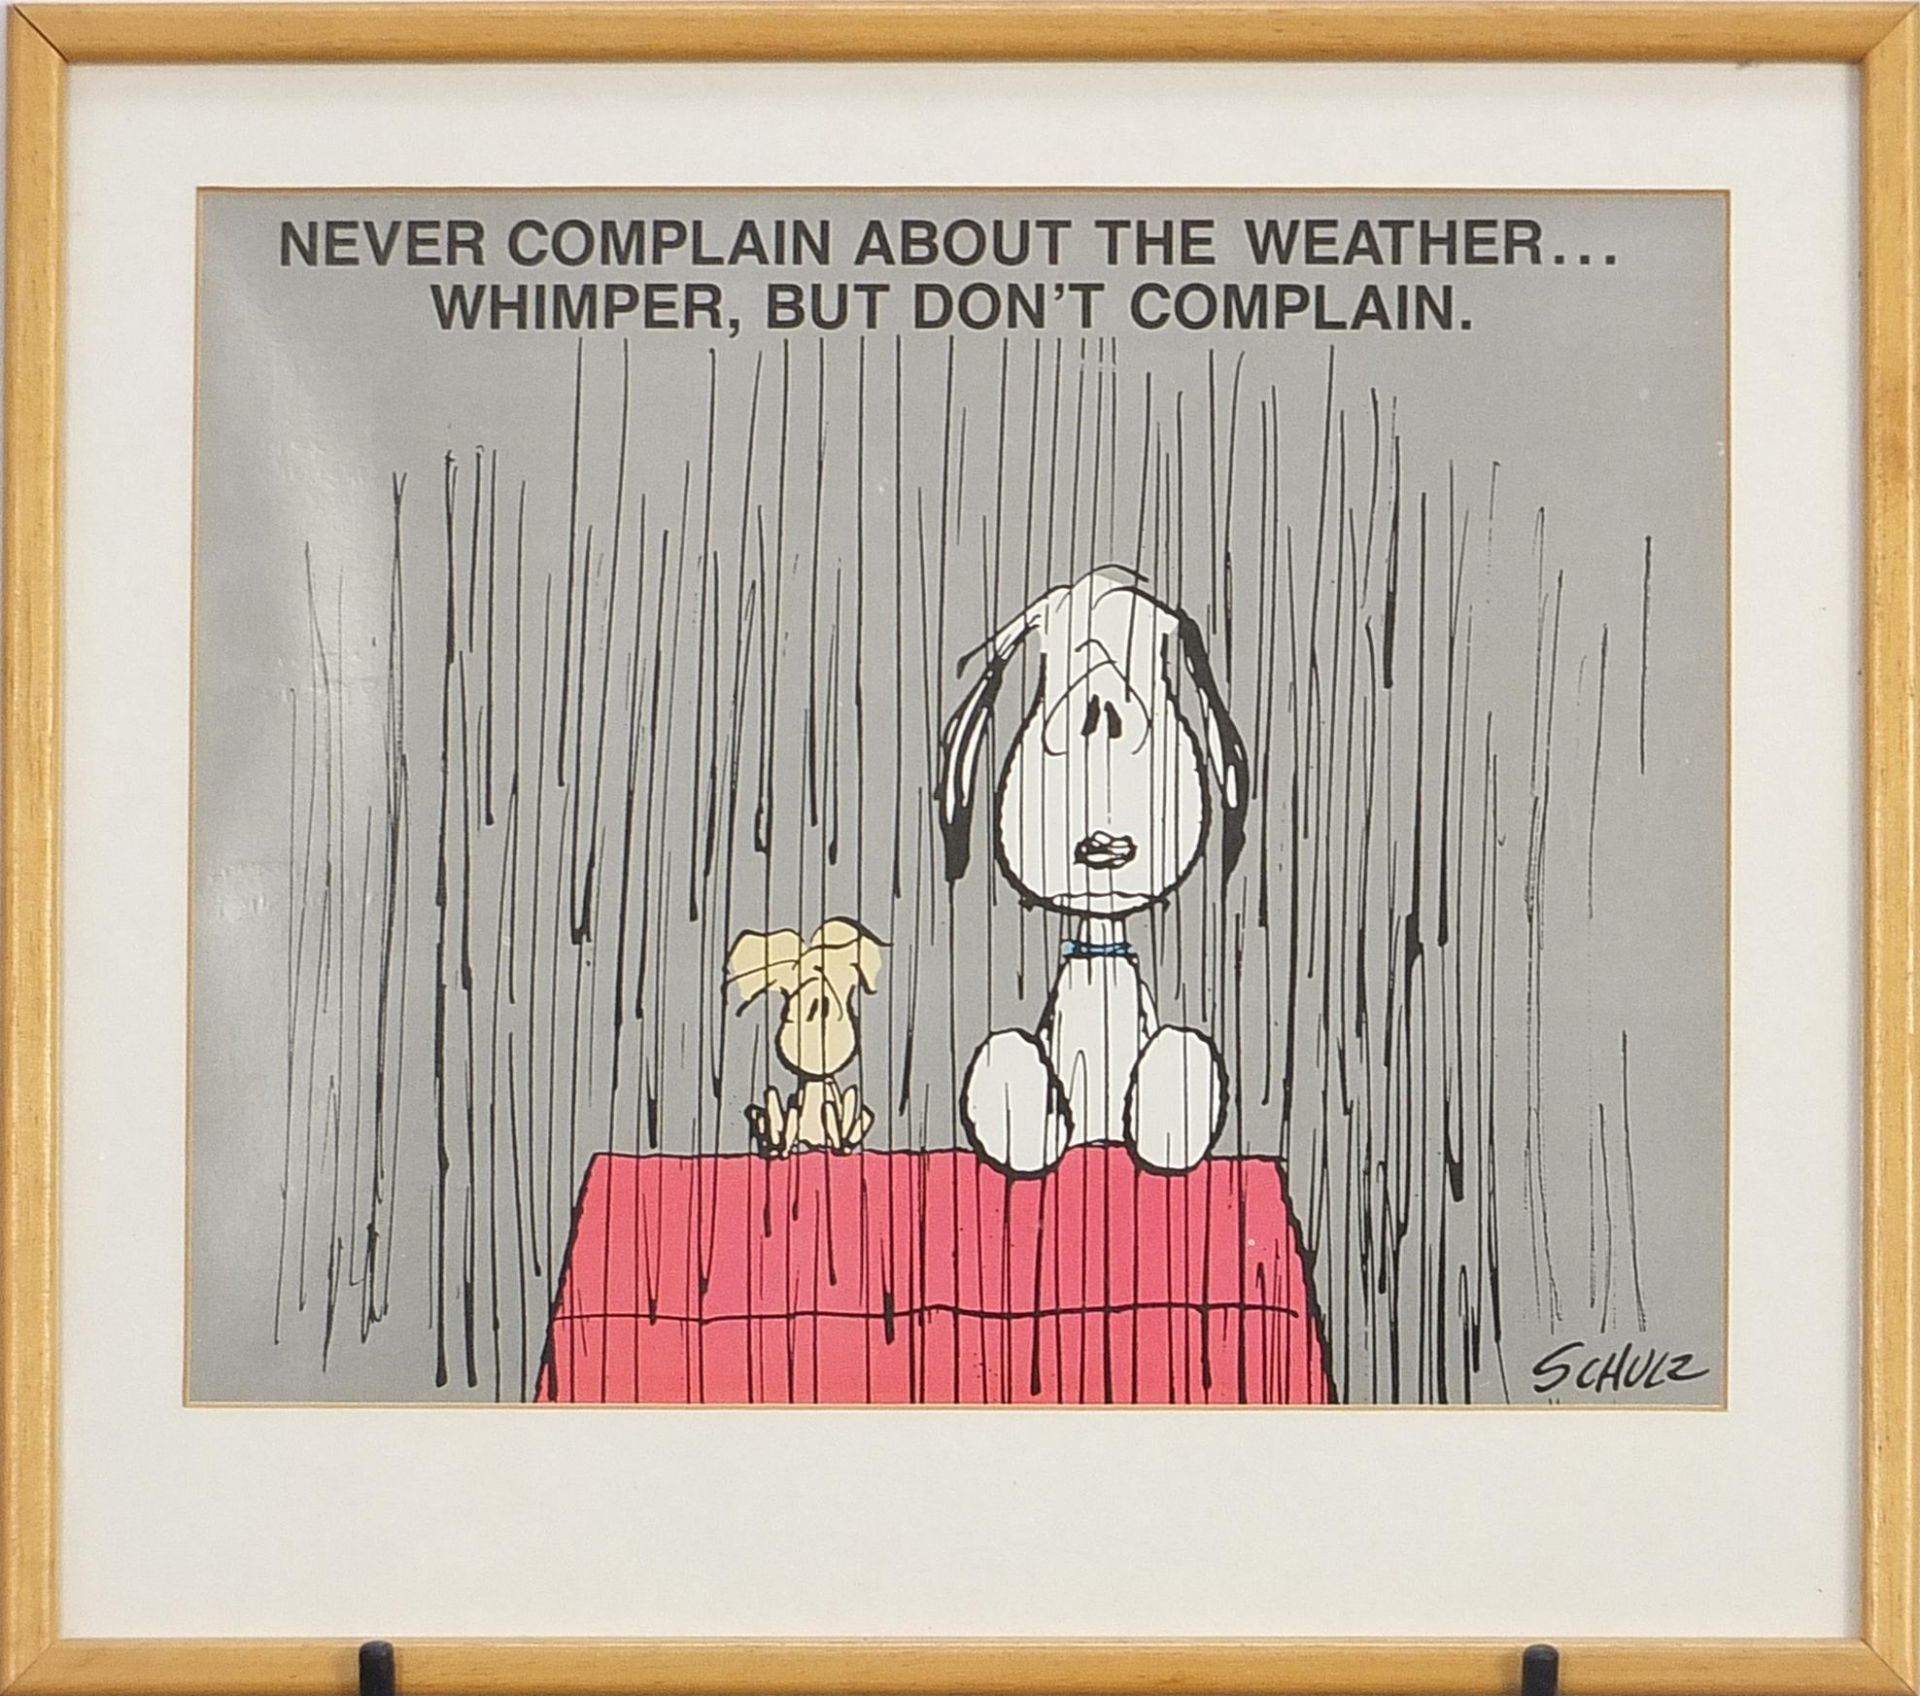 Schulz - Never Complain about the Weather ... Whimper, but don't Complain, print mounted and framed, - Image 2 of 4